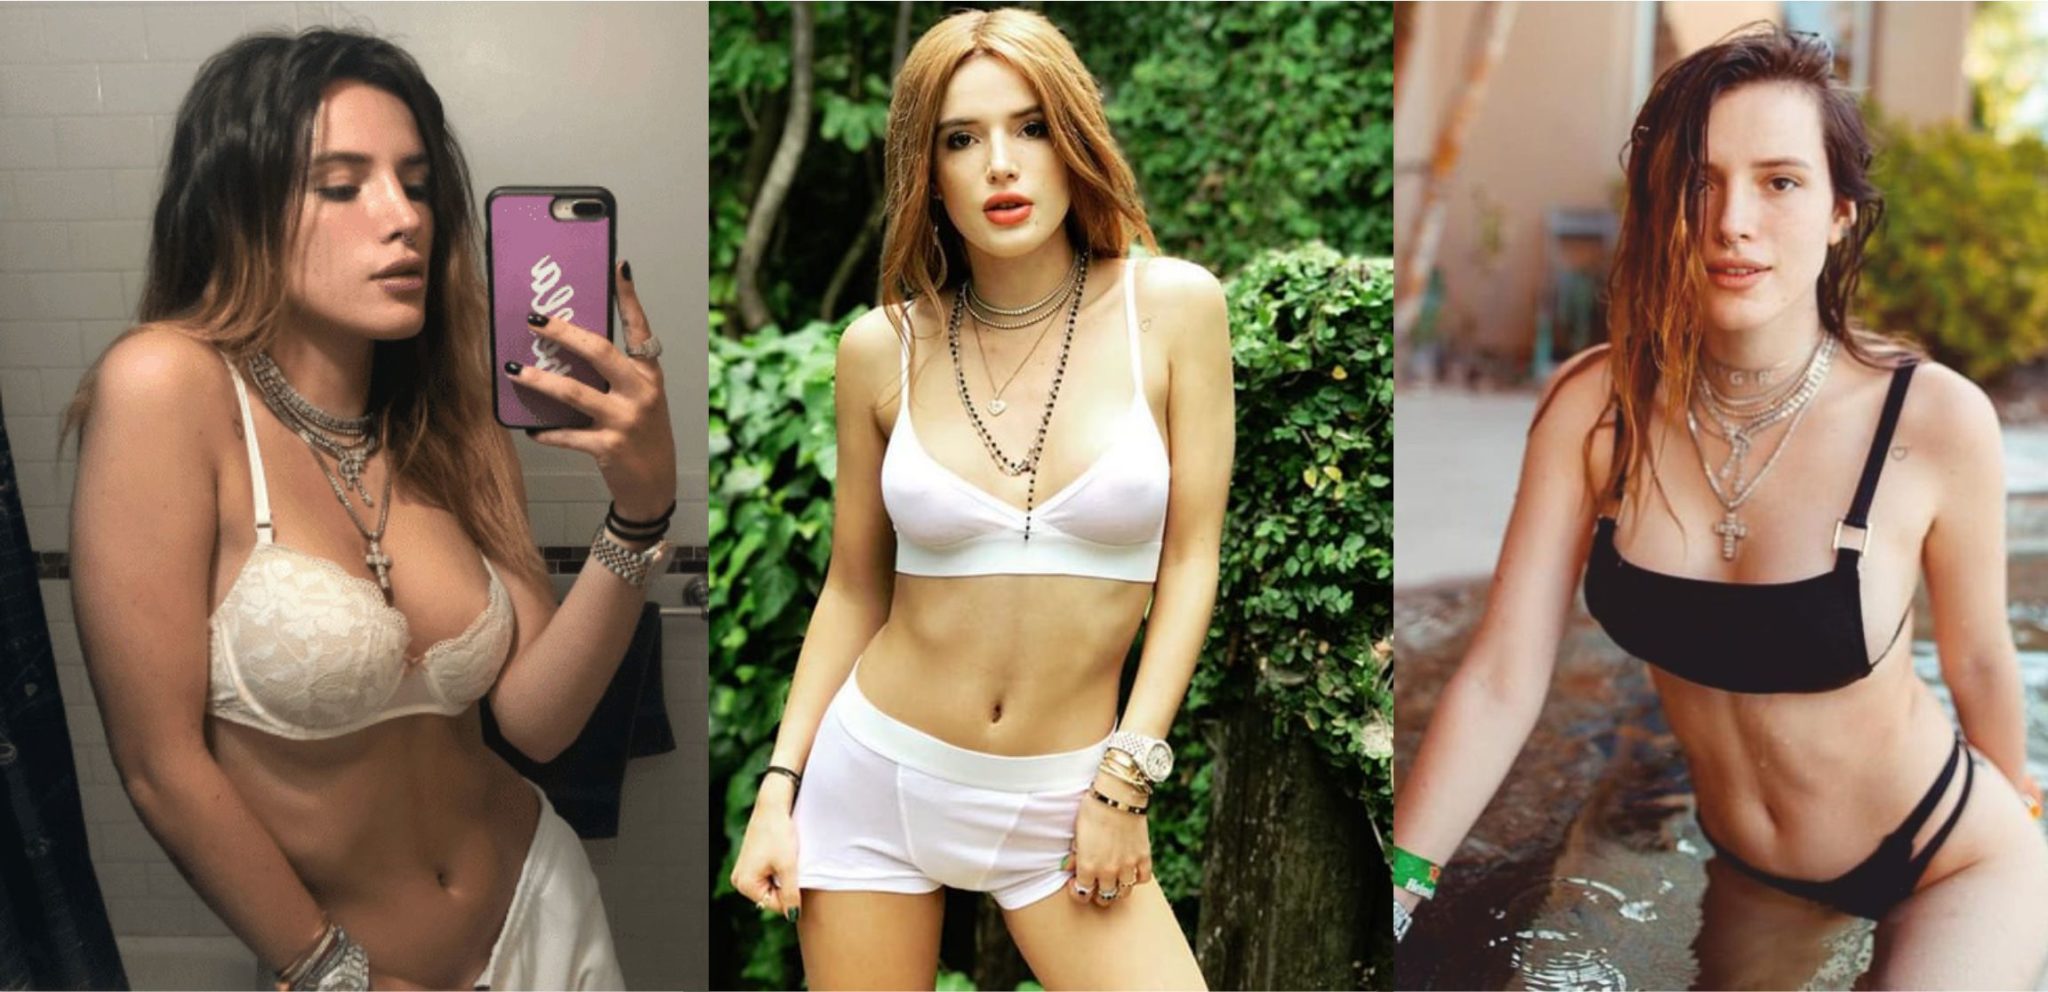 director.Bella Thorne tweets gone viral on twitter after threatened by hack...